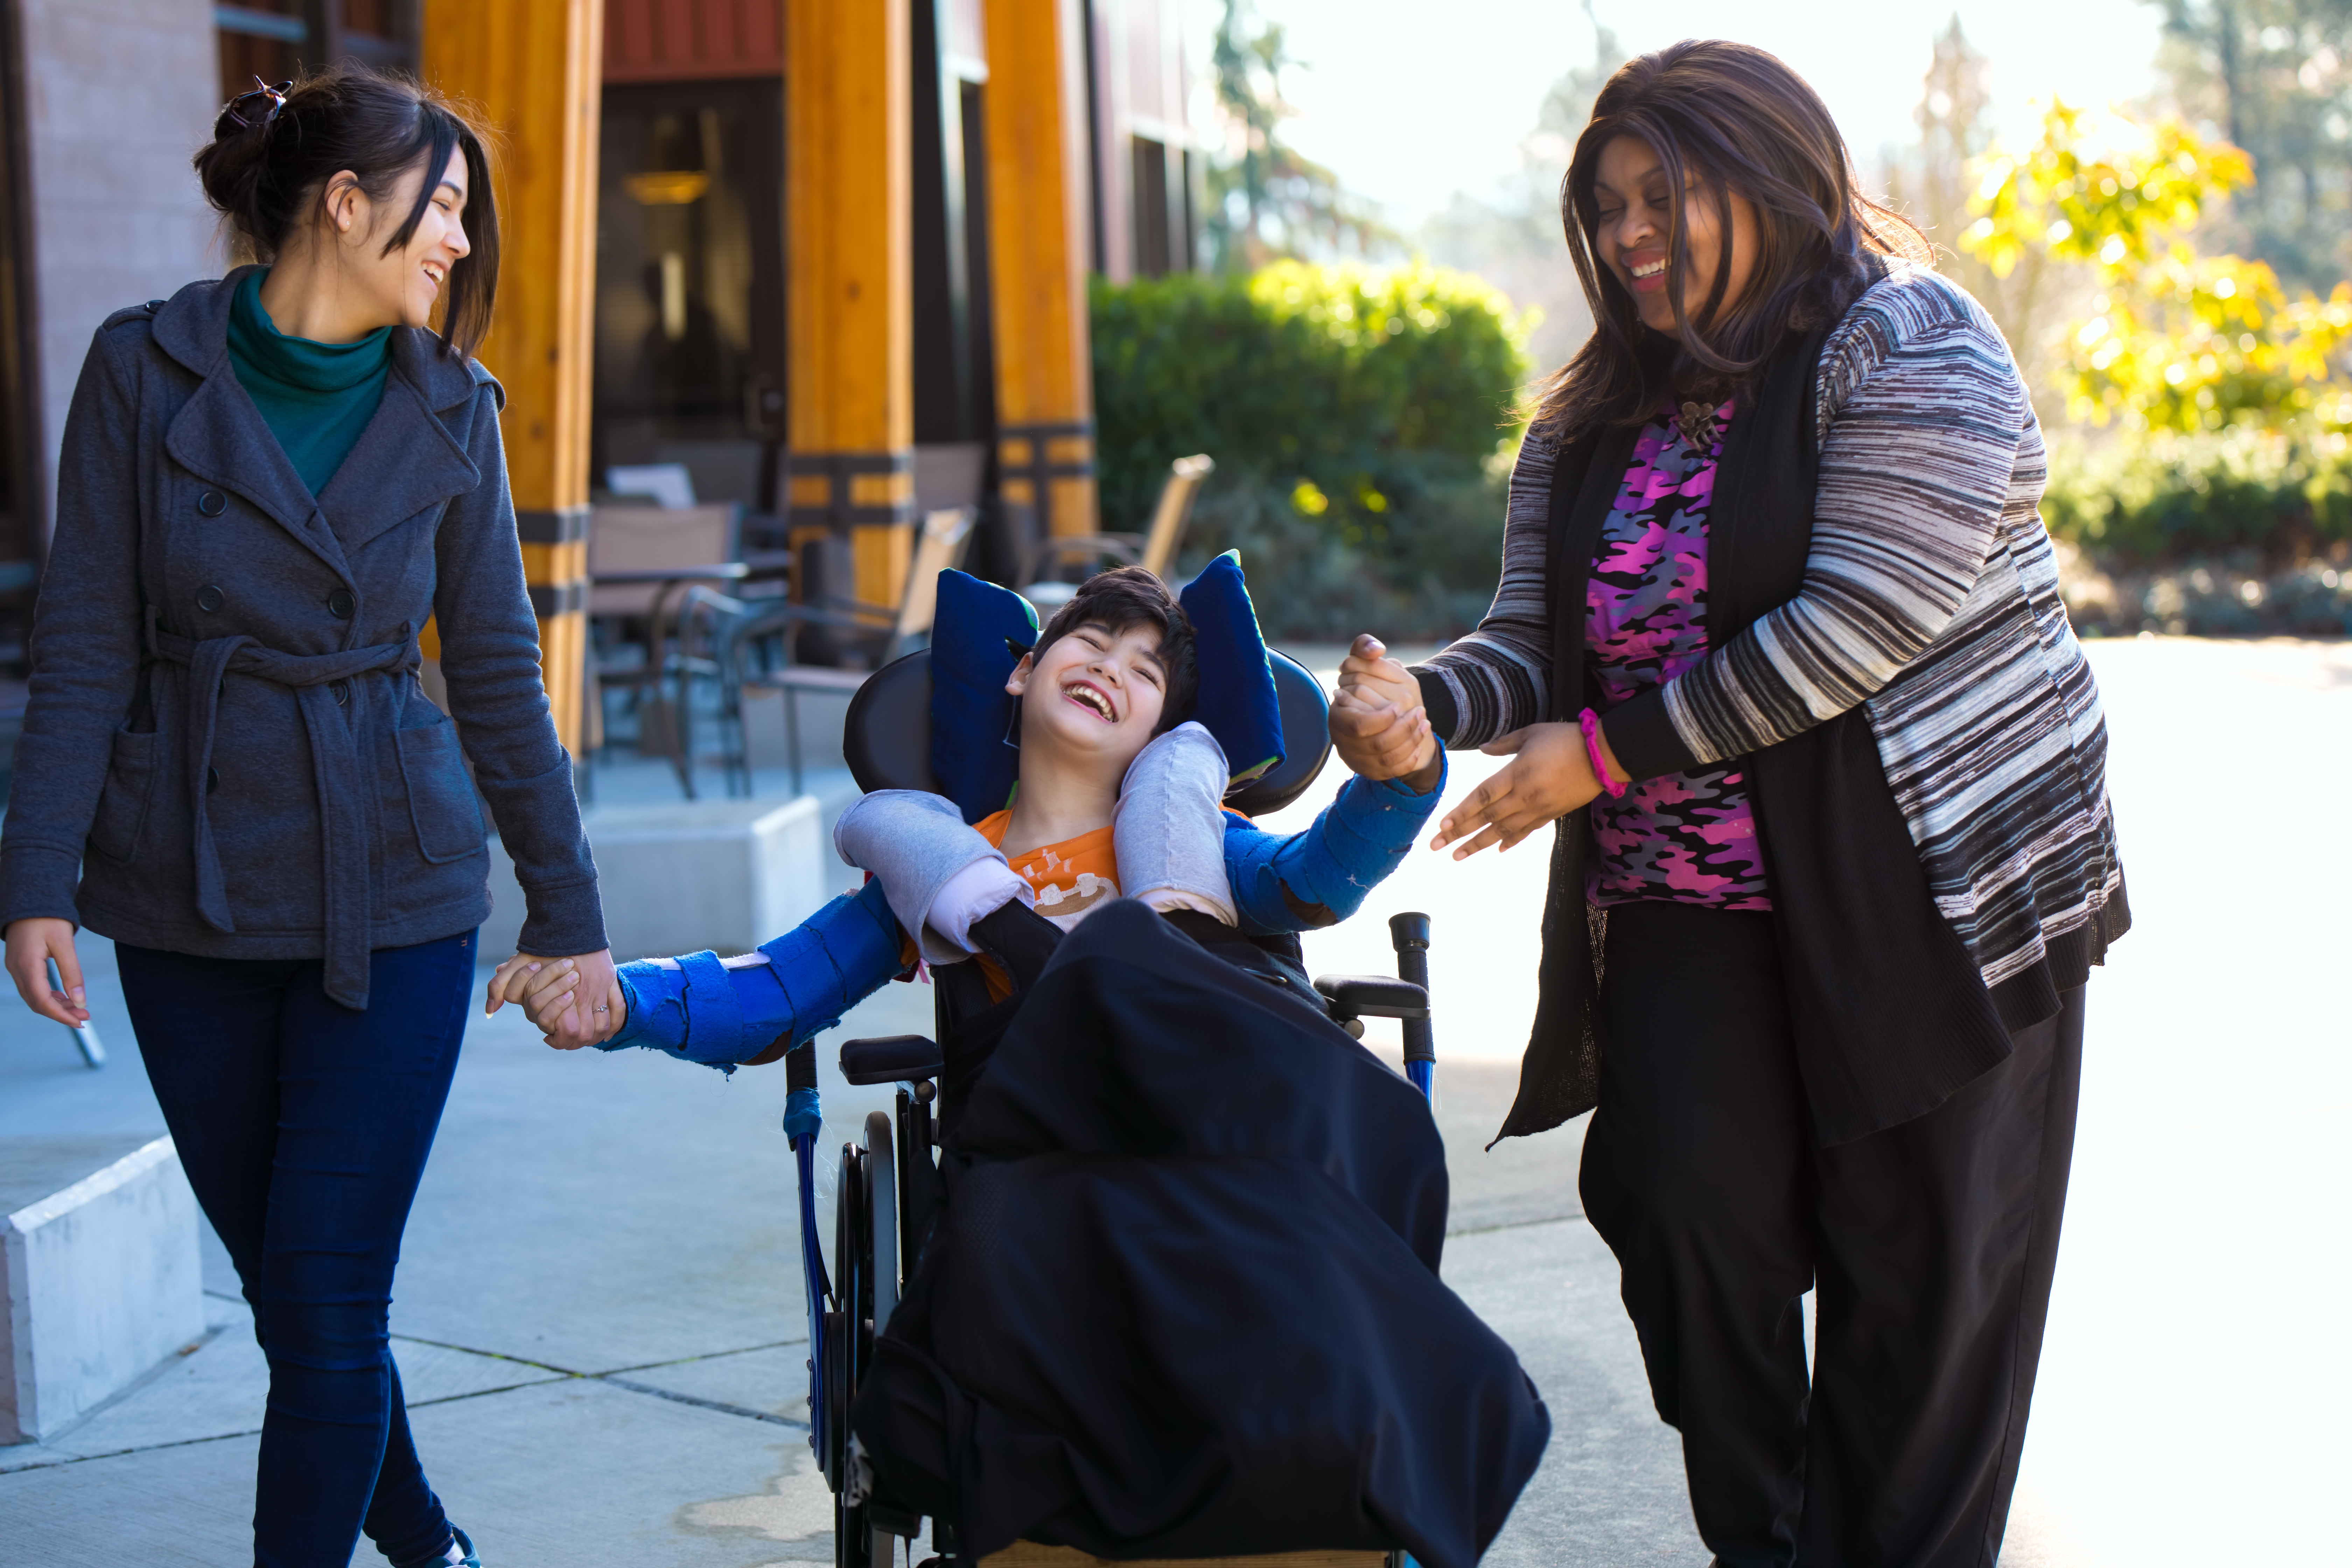 Image shows a male student with special needs in a wheelchair accompanied by two adult women on either side. The women are each holding one of his hands and looking at the boy. They are all smiling.